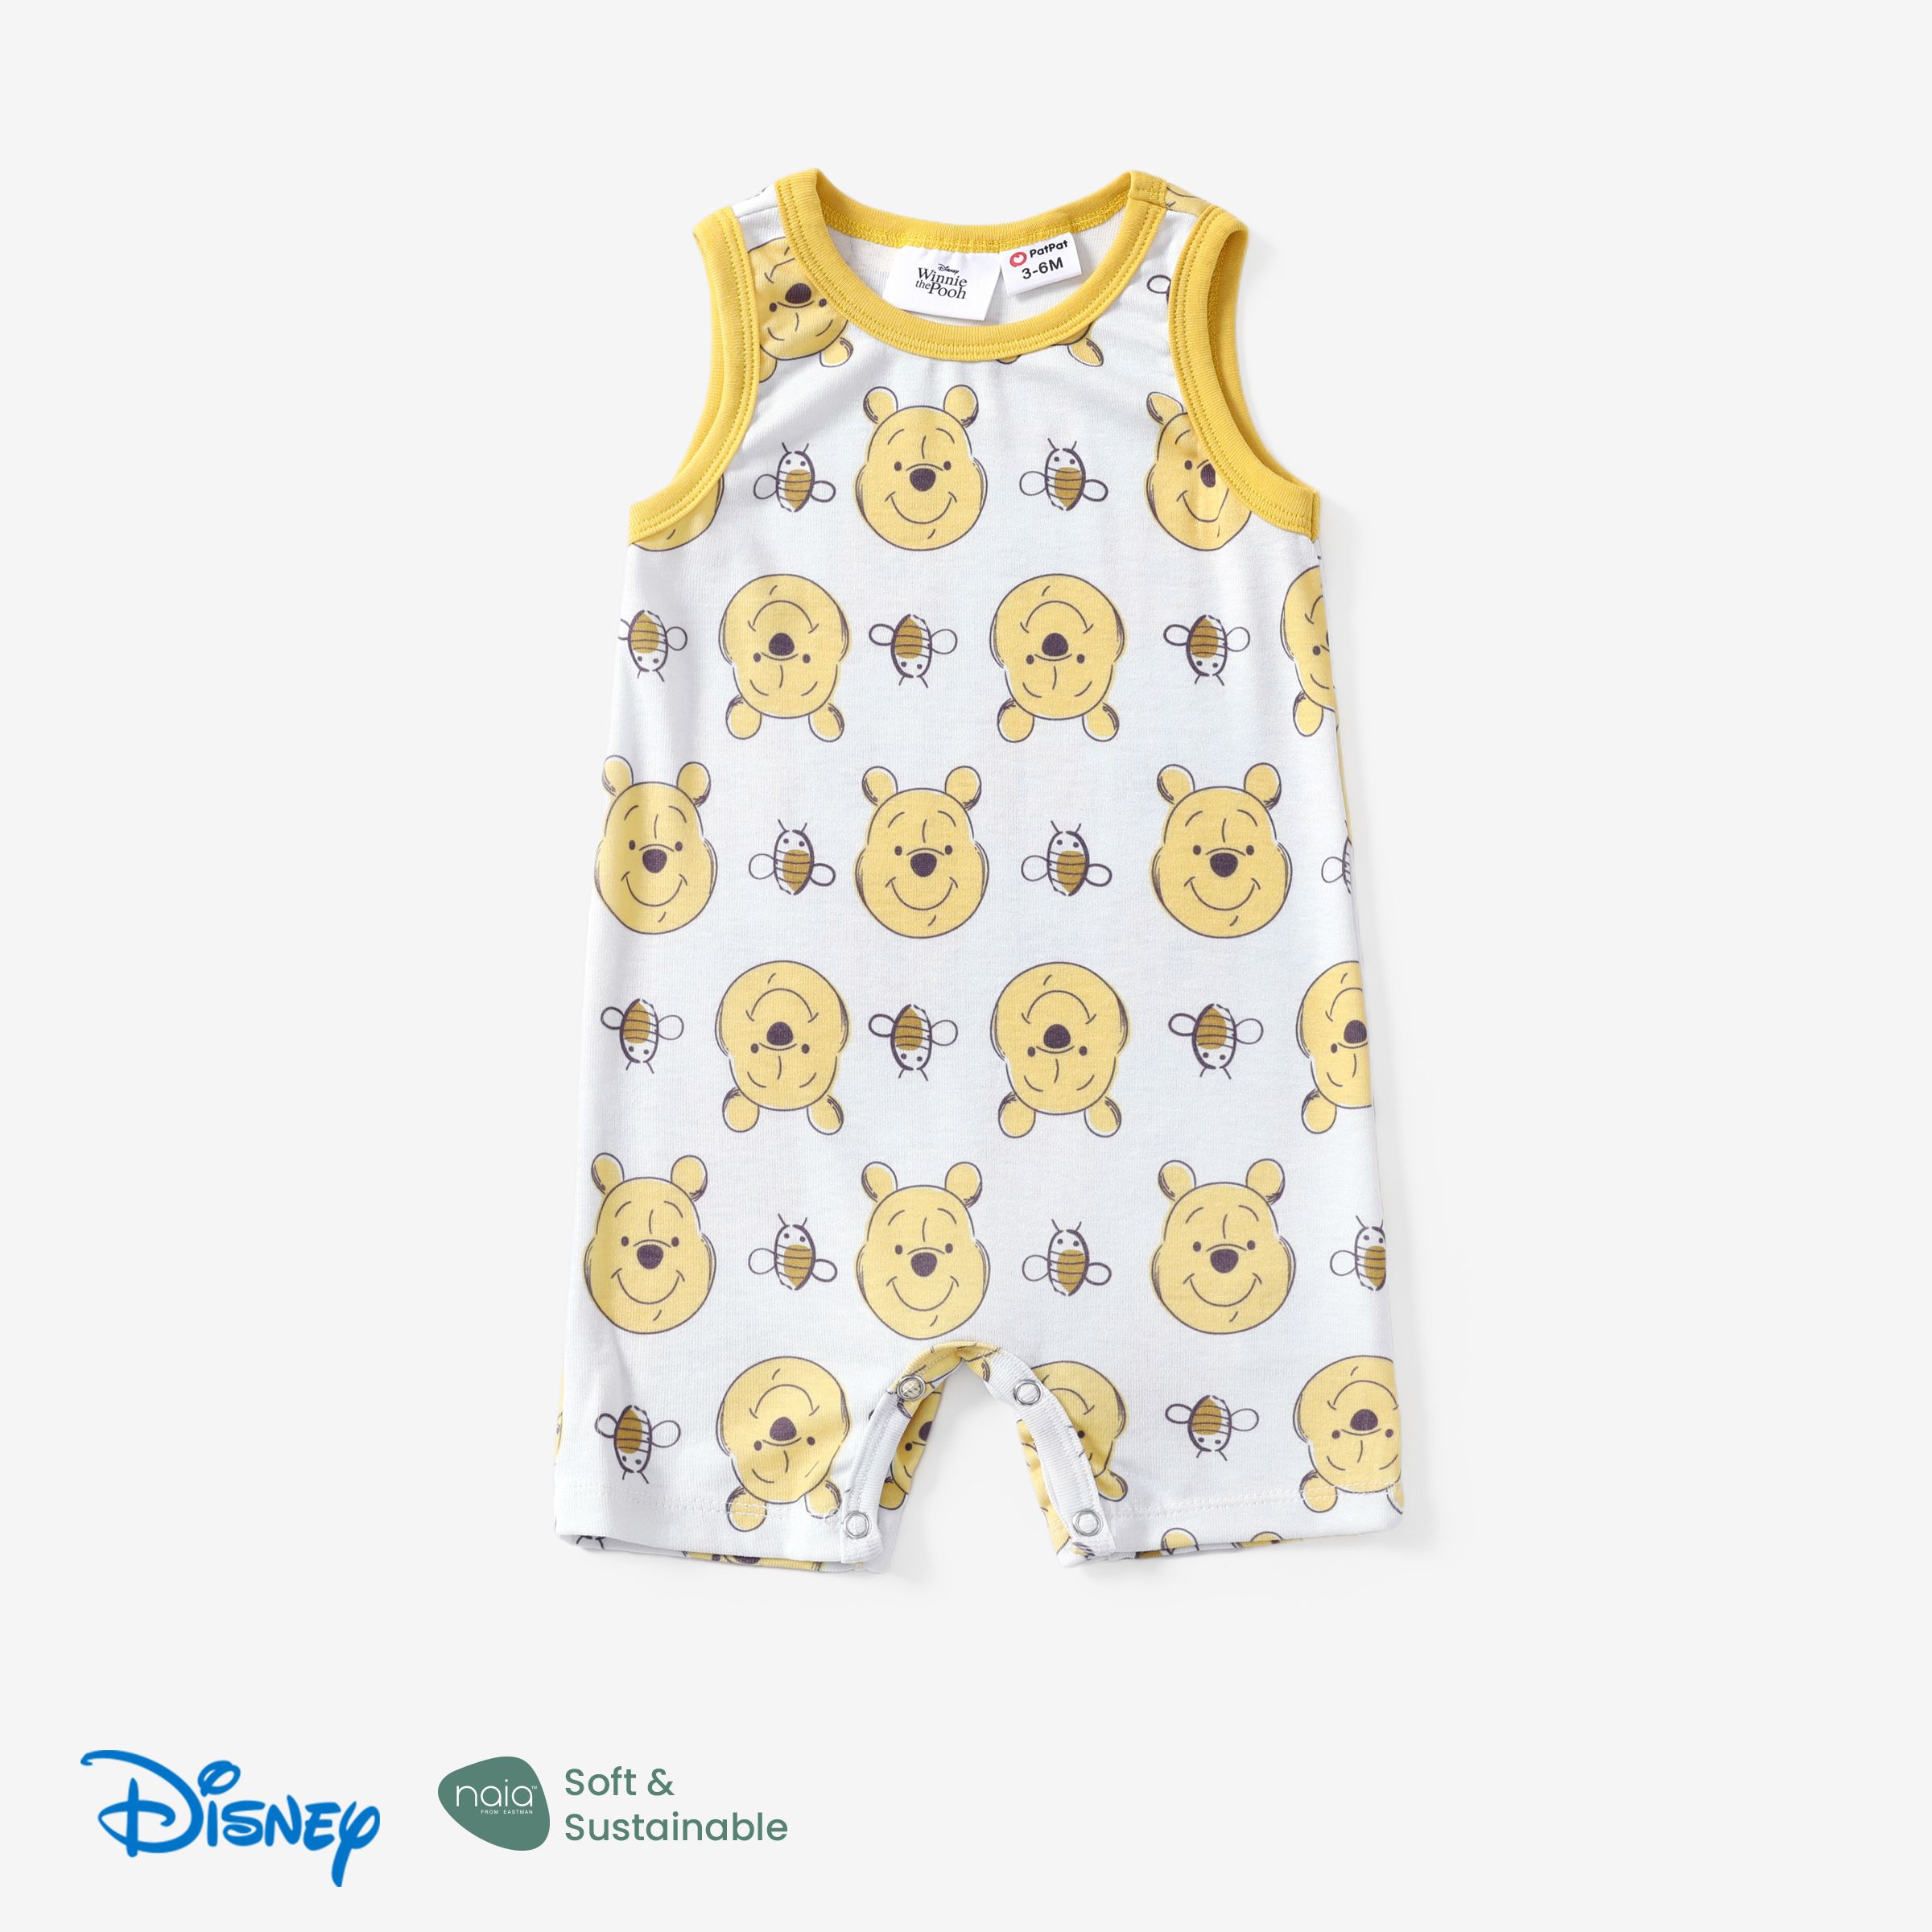 

Disney Winnie the Pooh Baby Boys/Girls 1pc Naia™ Character All-over Print Short-sleeve Romper